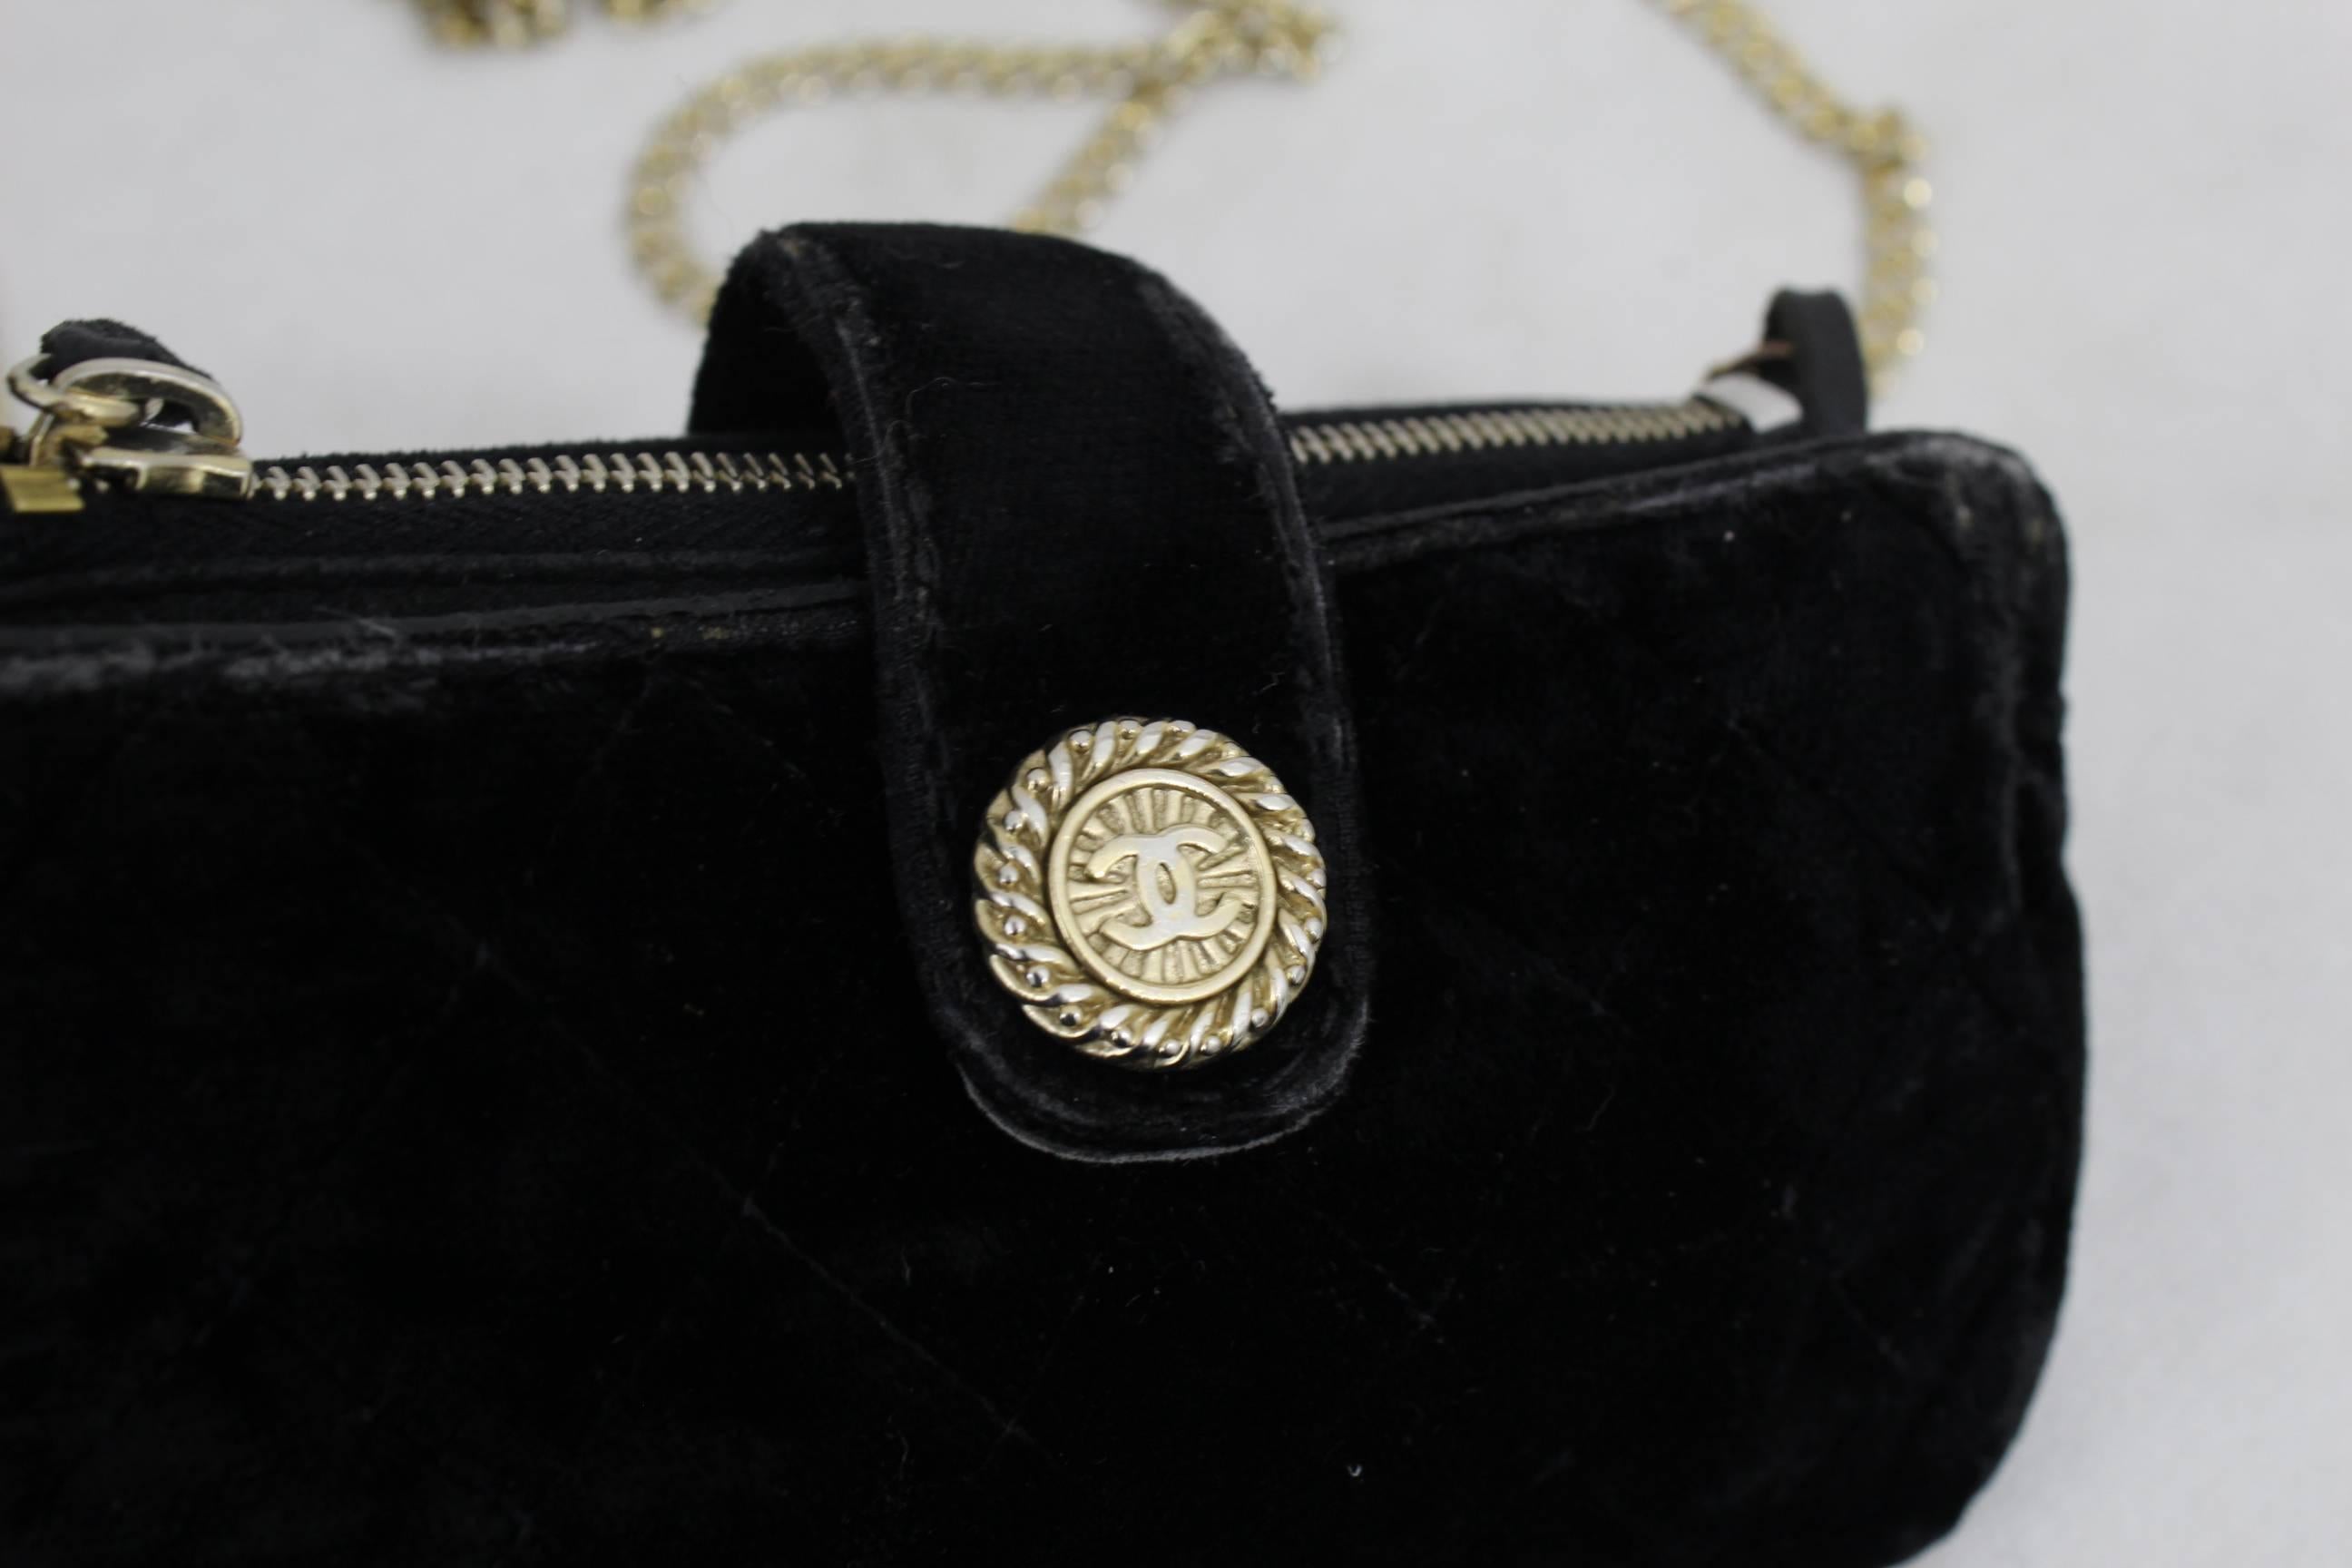 Nice Vintage Chanel Medaillon Micro velvet Bag with golden chain.

Vintage bag iss fair/good condition, no major defect but signs of wear.

One zipped pocket 

Size 5.5x3 inches